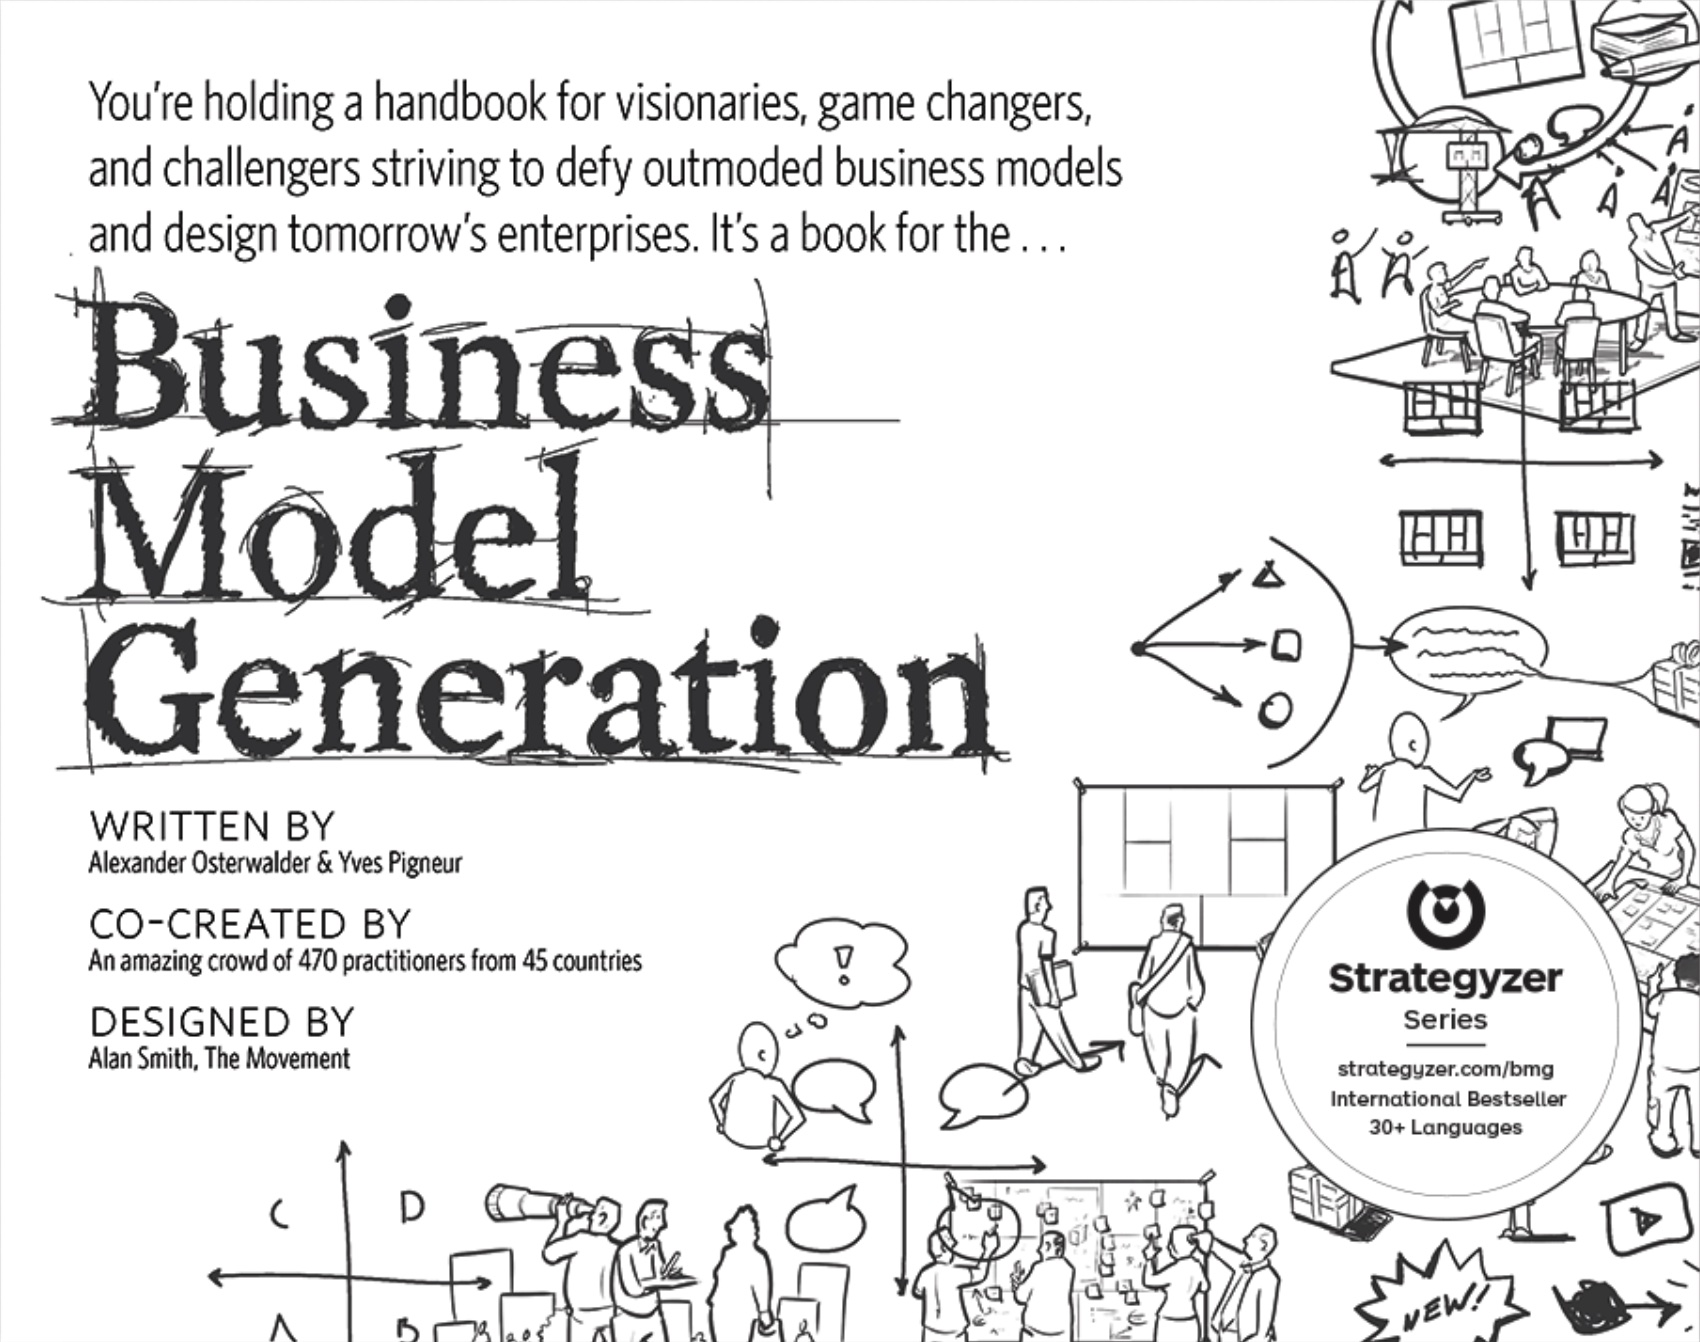 Business Model Generation: A Handbook for Visionaries, Game Changers, and Challengers (Strategyzer)